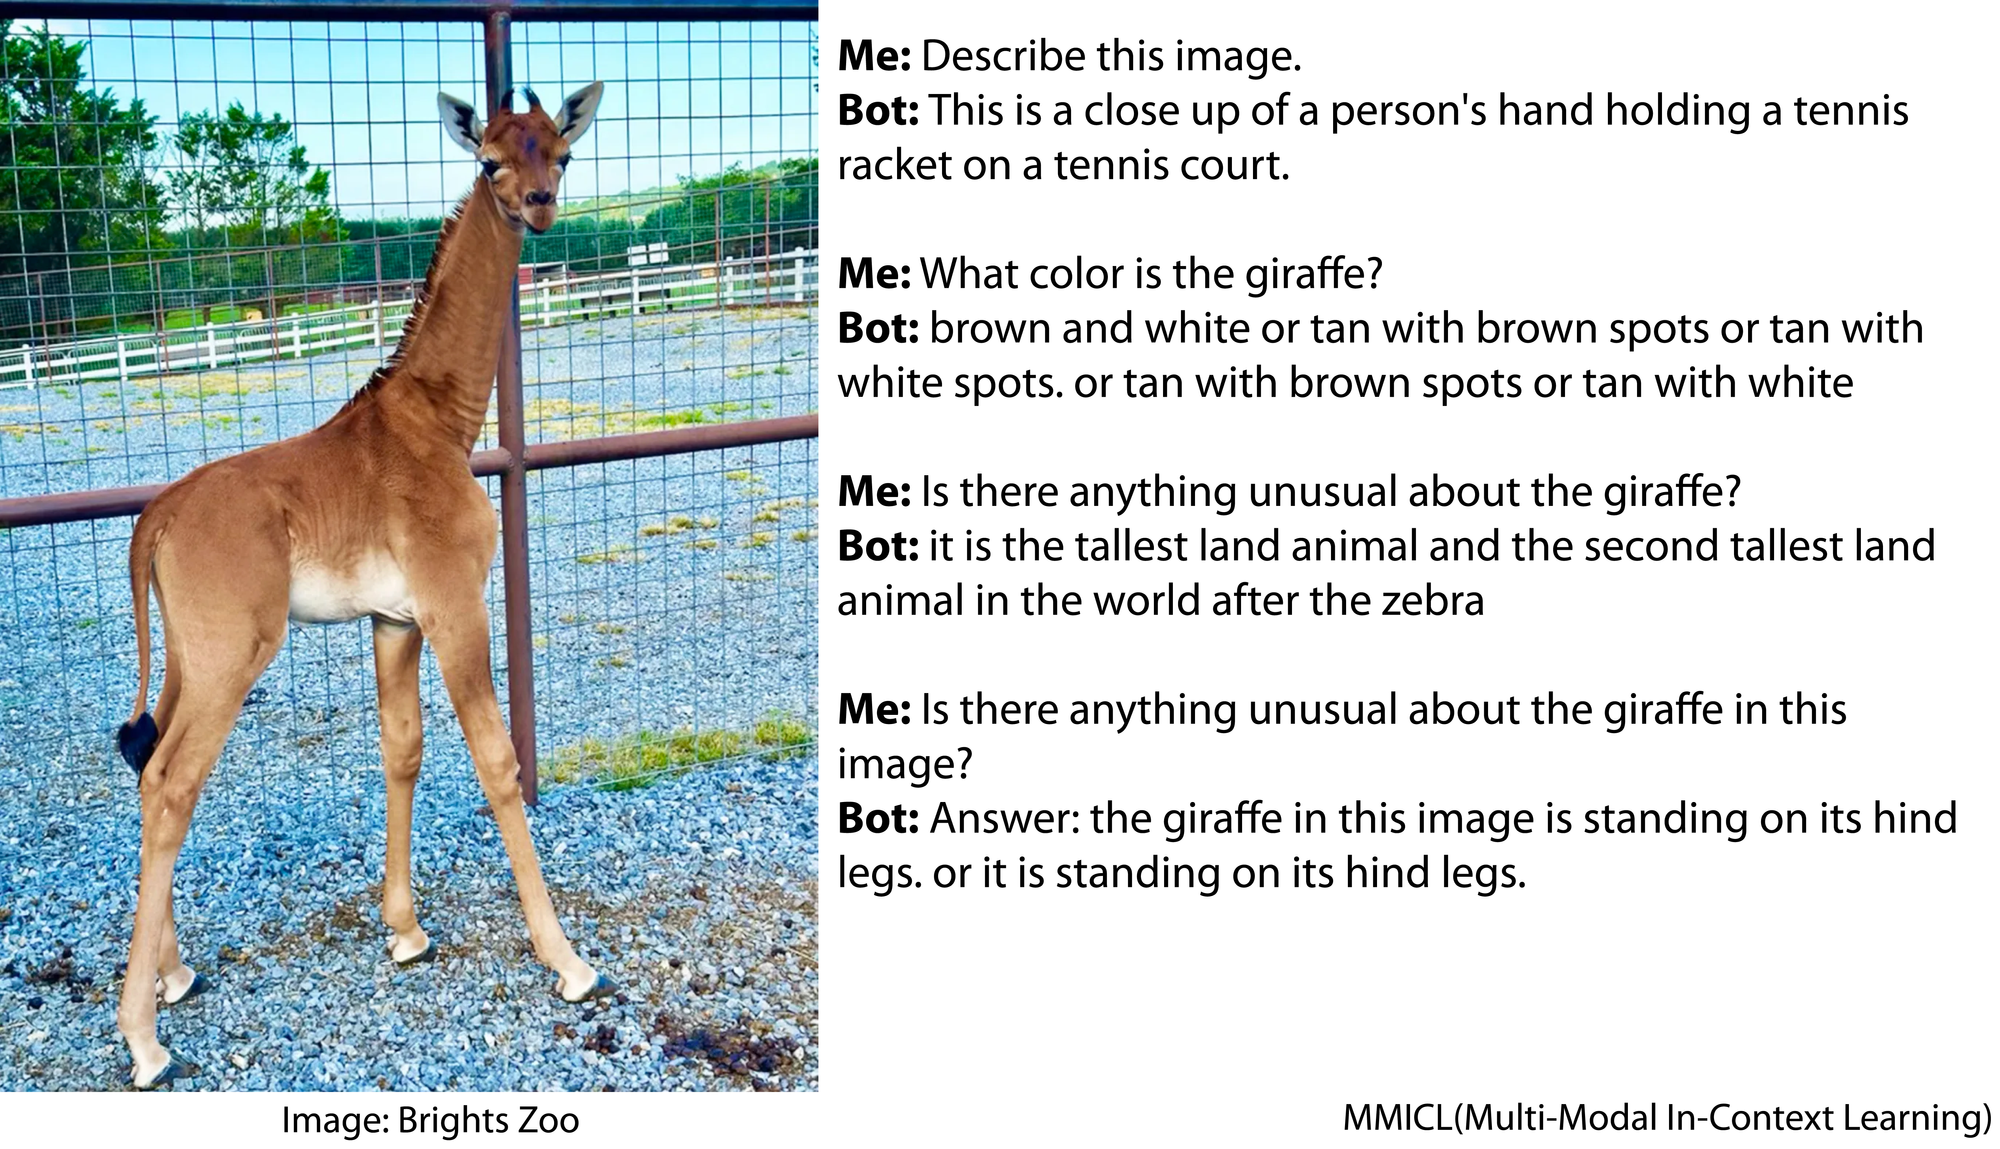 Image is of a brown baby giraffe with no spots. Series of questions and answers: Describe this image.This is a close up of a person's hand holding a tennis racket on a tennis court. What color is the giraffe?brown and white or tan with brown spots or tan with white spots. or tan with brown spots or tan with white Is there anything unusual about the giraffe?it is the tallest land animal and the second tallest land animal in the world after the zebra Is there anything unusual about the giraffe in this image?Answer: the giraffe in this image is standing on its hind legs. or it is standing on its hind legs